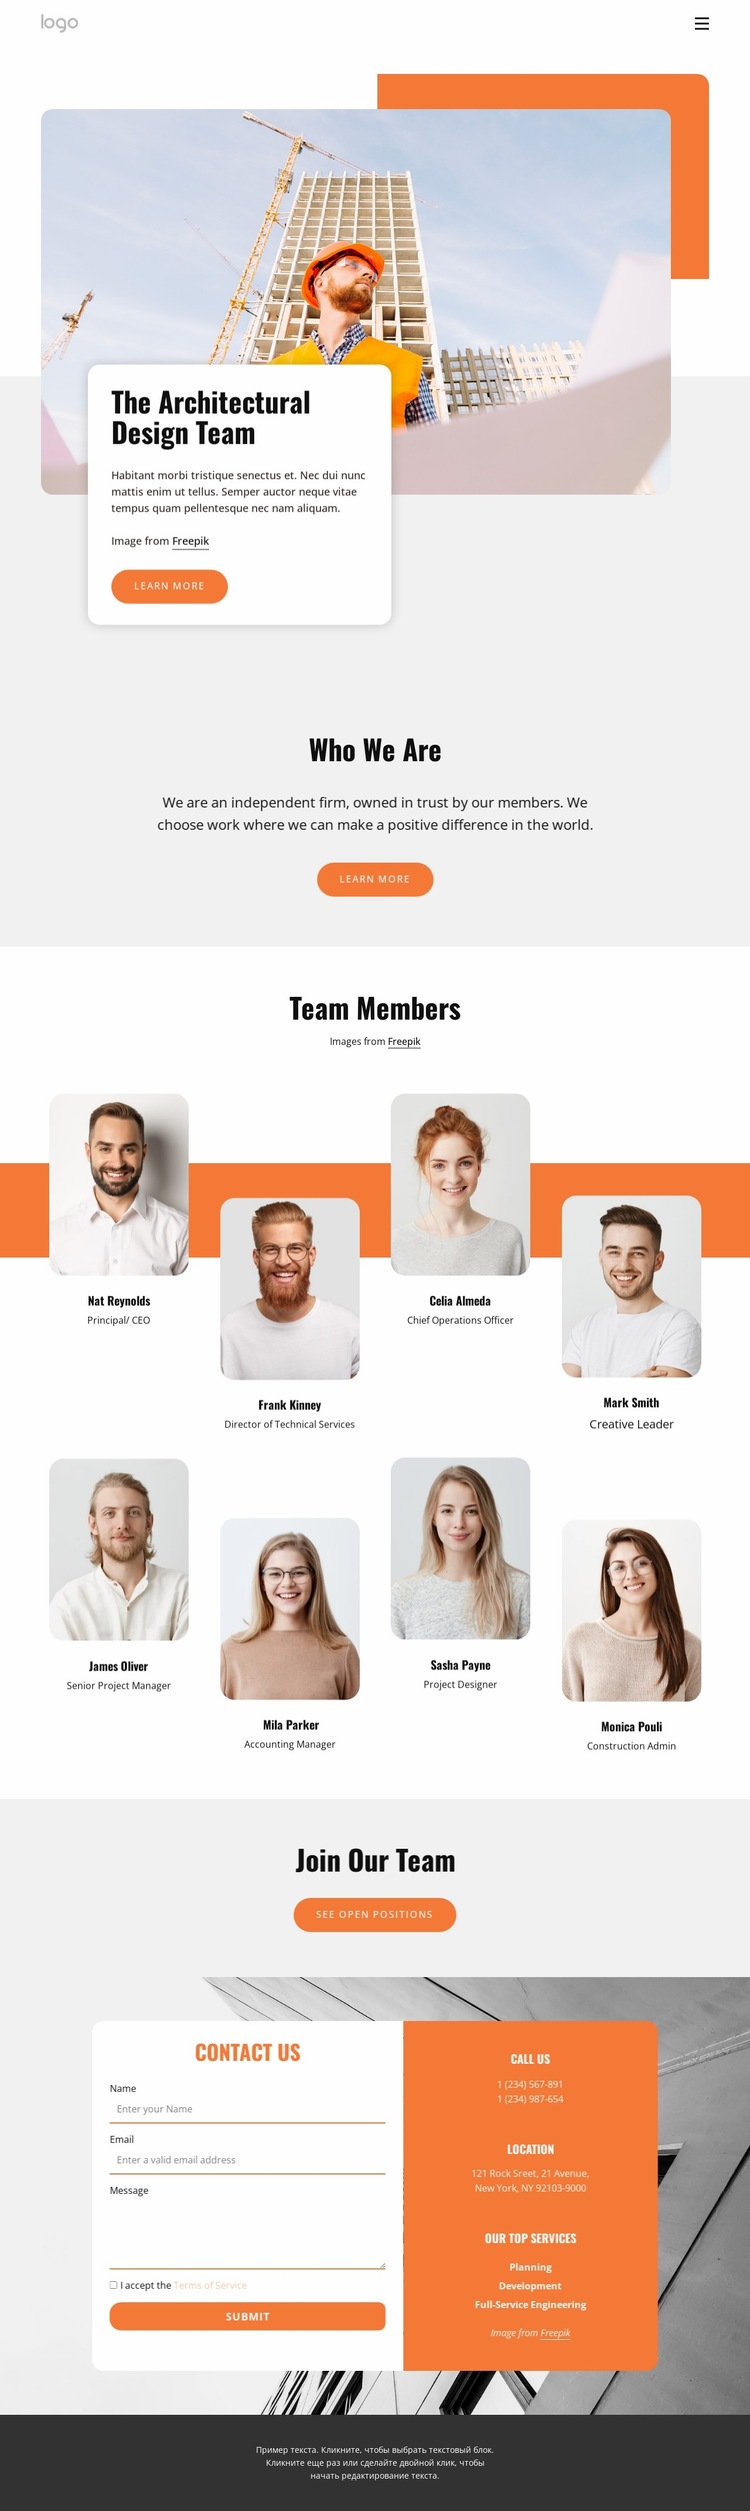 The planning firm with 53 offices and 7000+ professionals Website Builder Templates